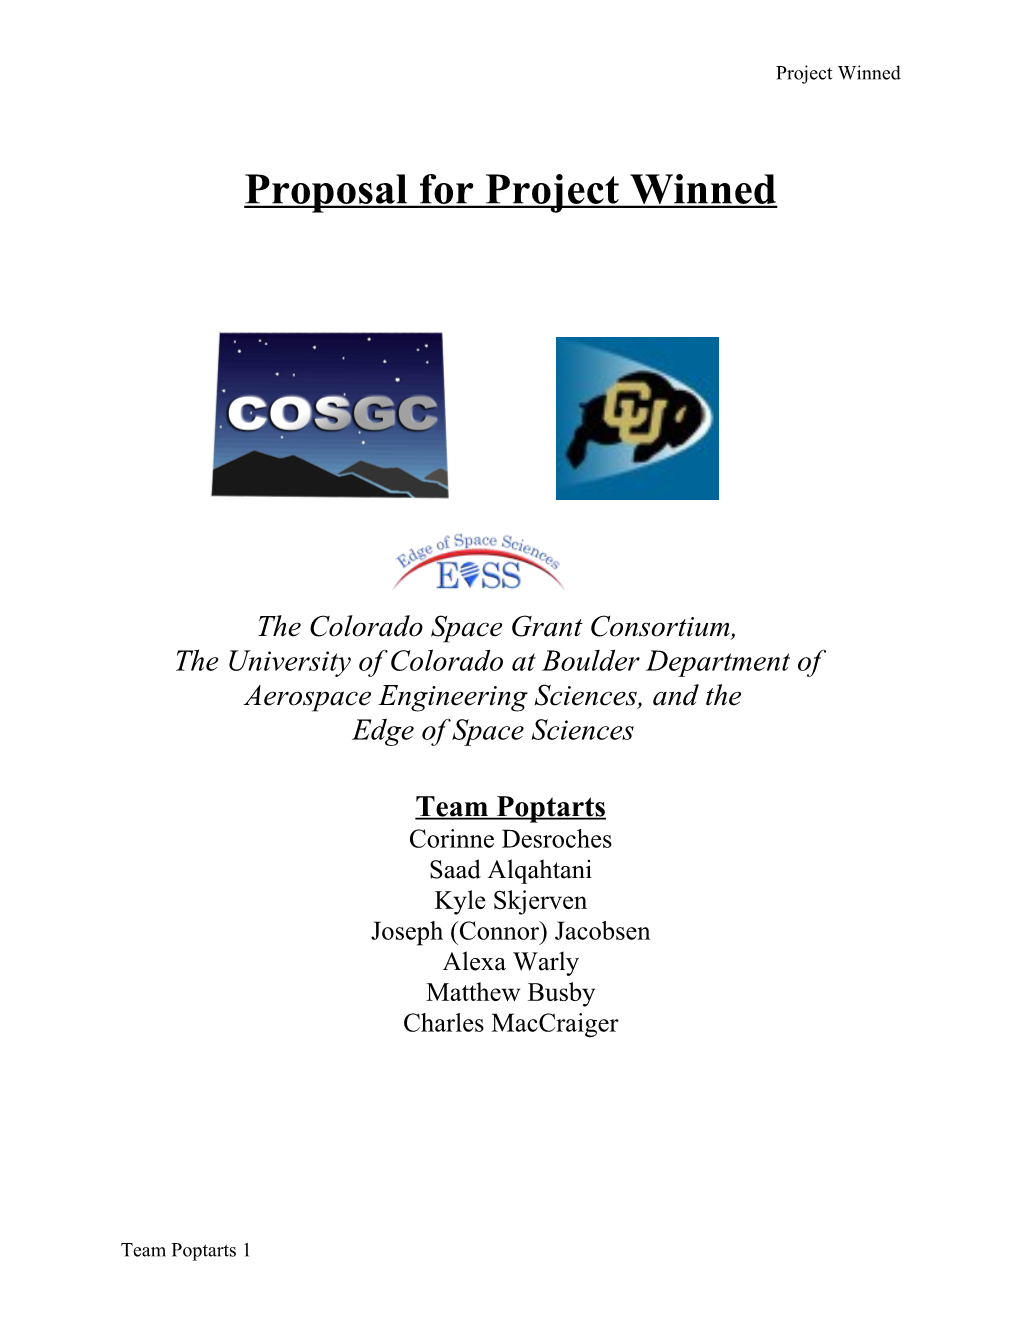 Proposal for Project Winned